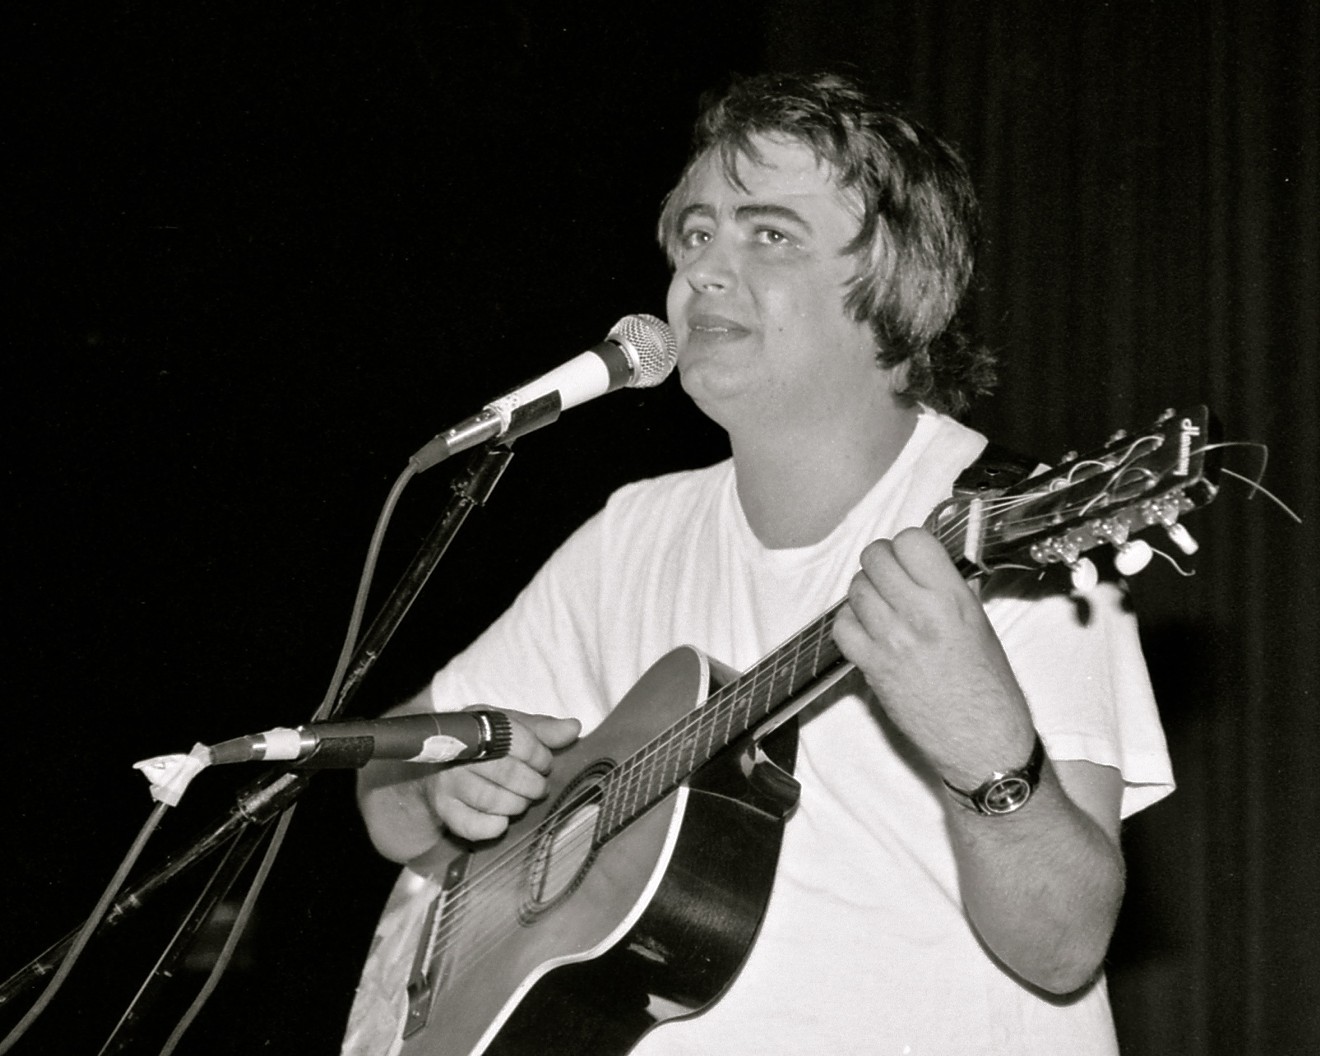 Experience the imagined world of Daniel Johnston at a new exhibition at Deborah Colton Gallery.